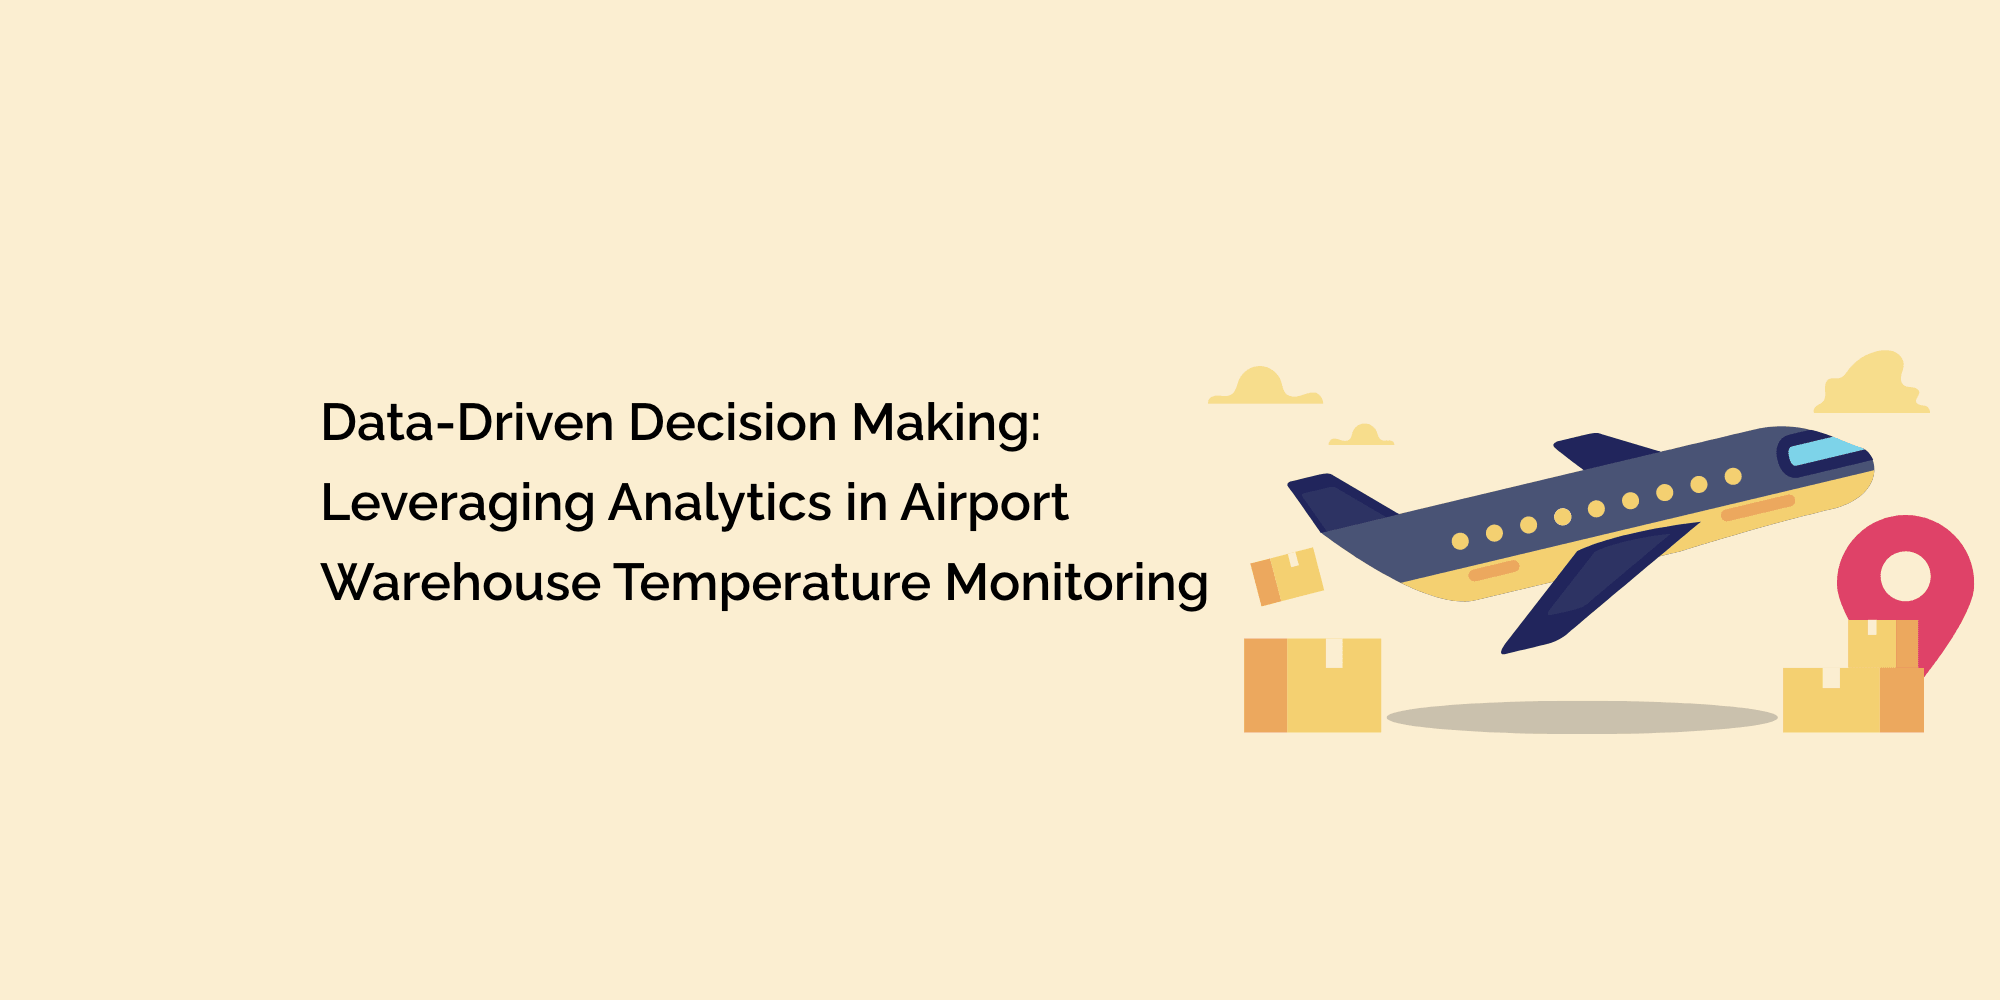 Data-Driven Decision Making: Leveraging Analytics in Airport Warehouse Temperature Monitoring"